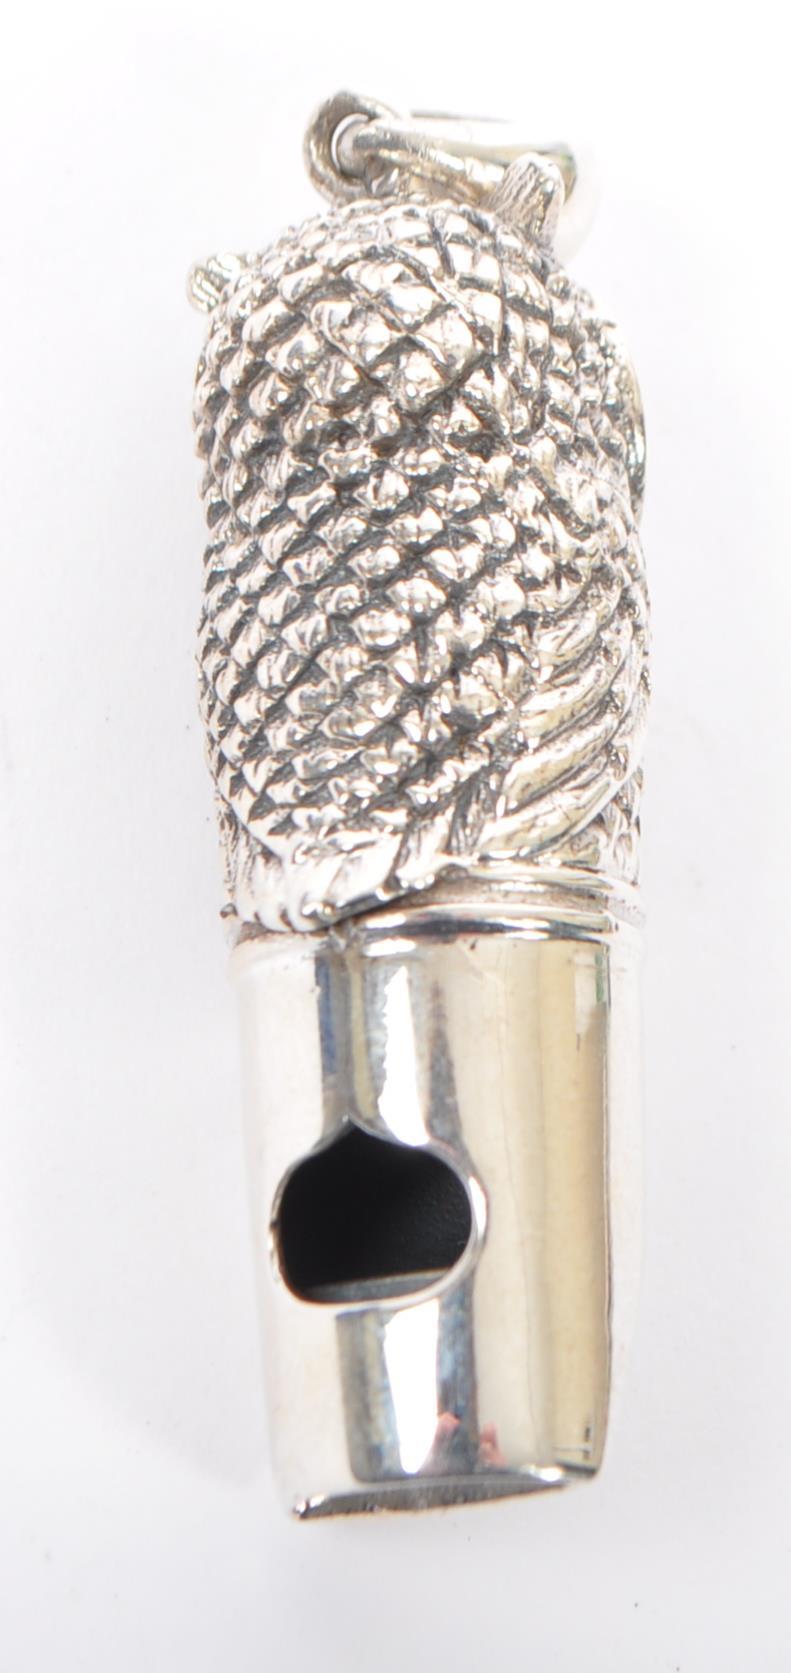 SILVER STAMPED STERLING 925 OWL WHISTLE - Image 3 of 5